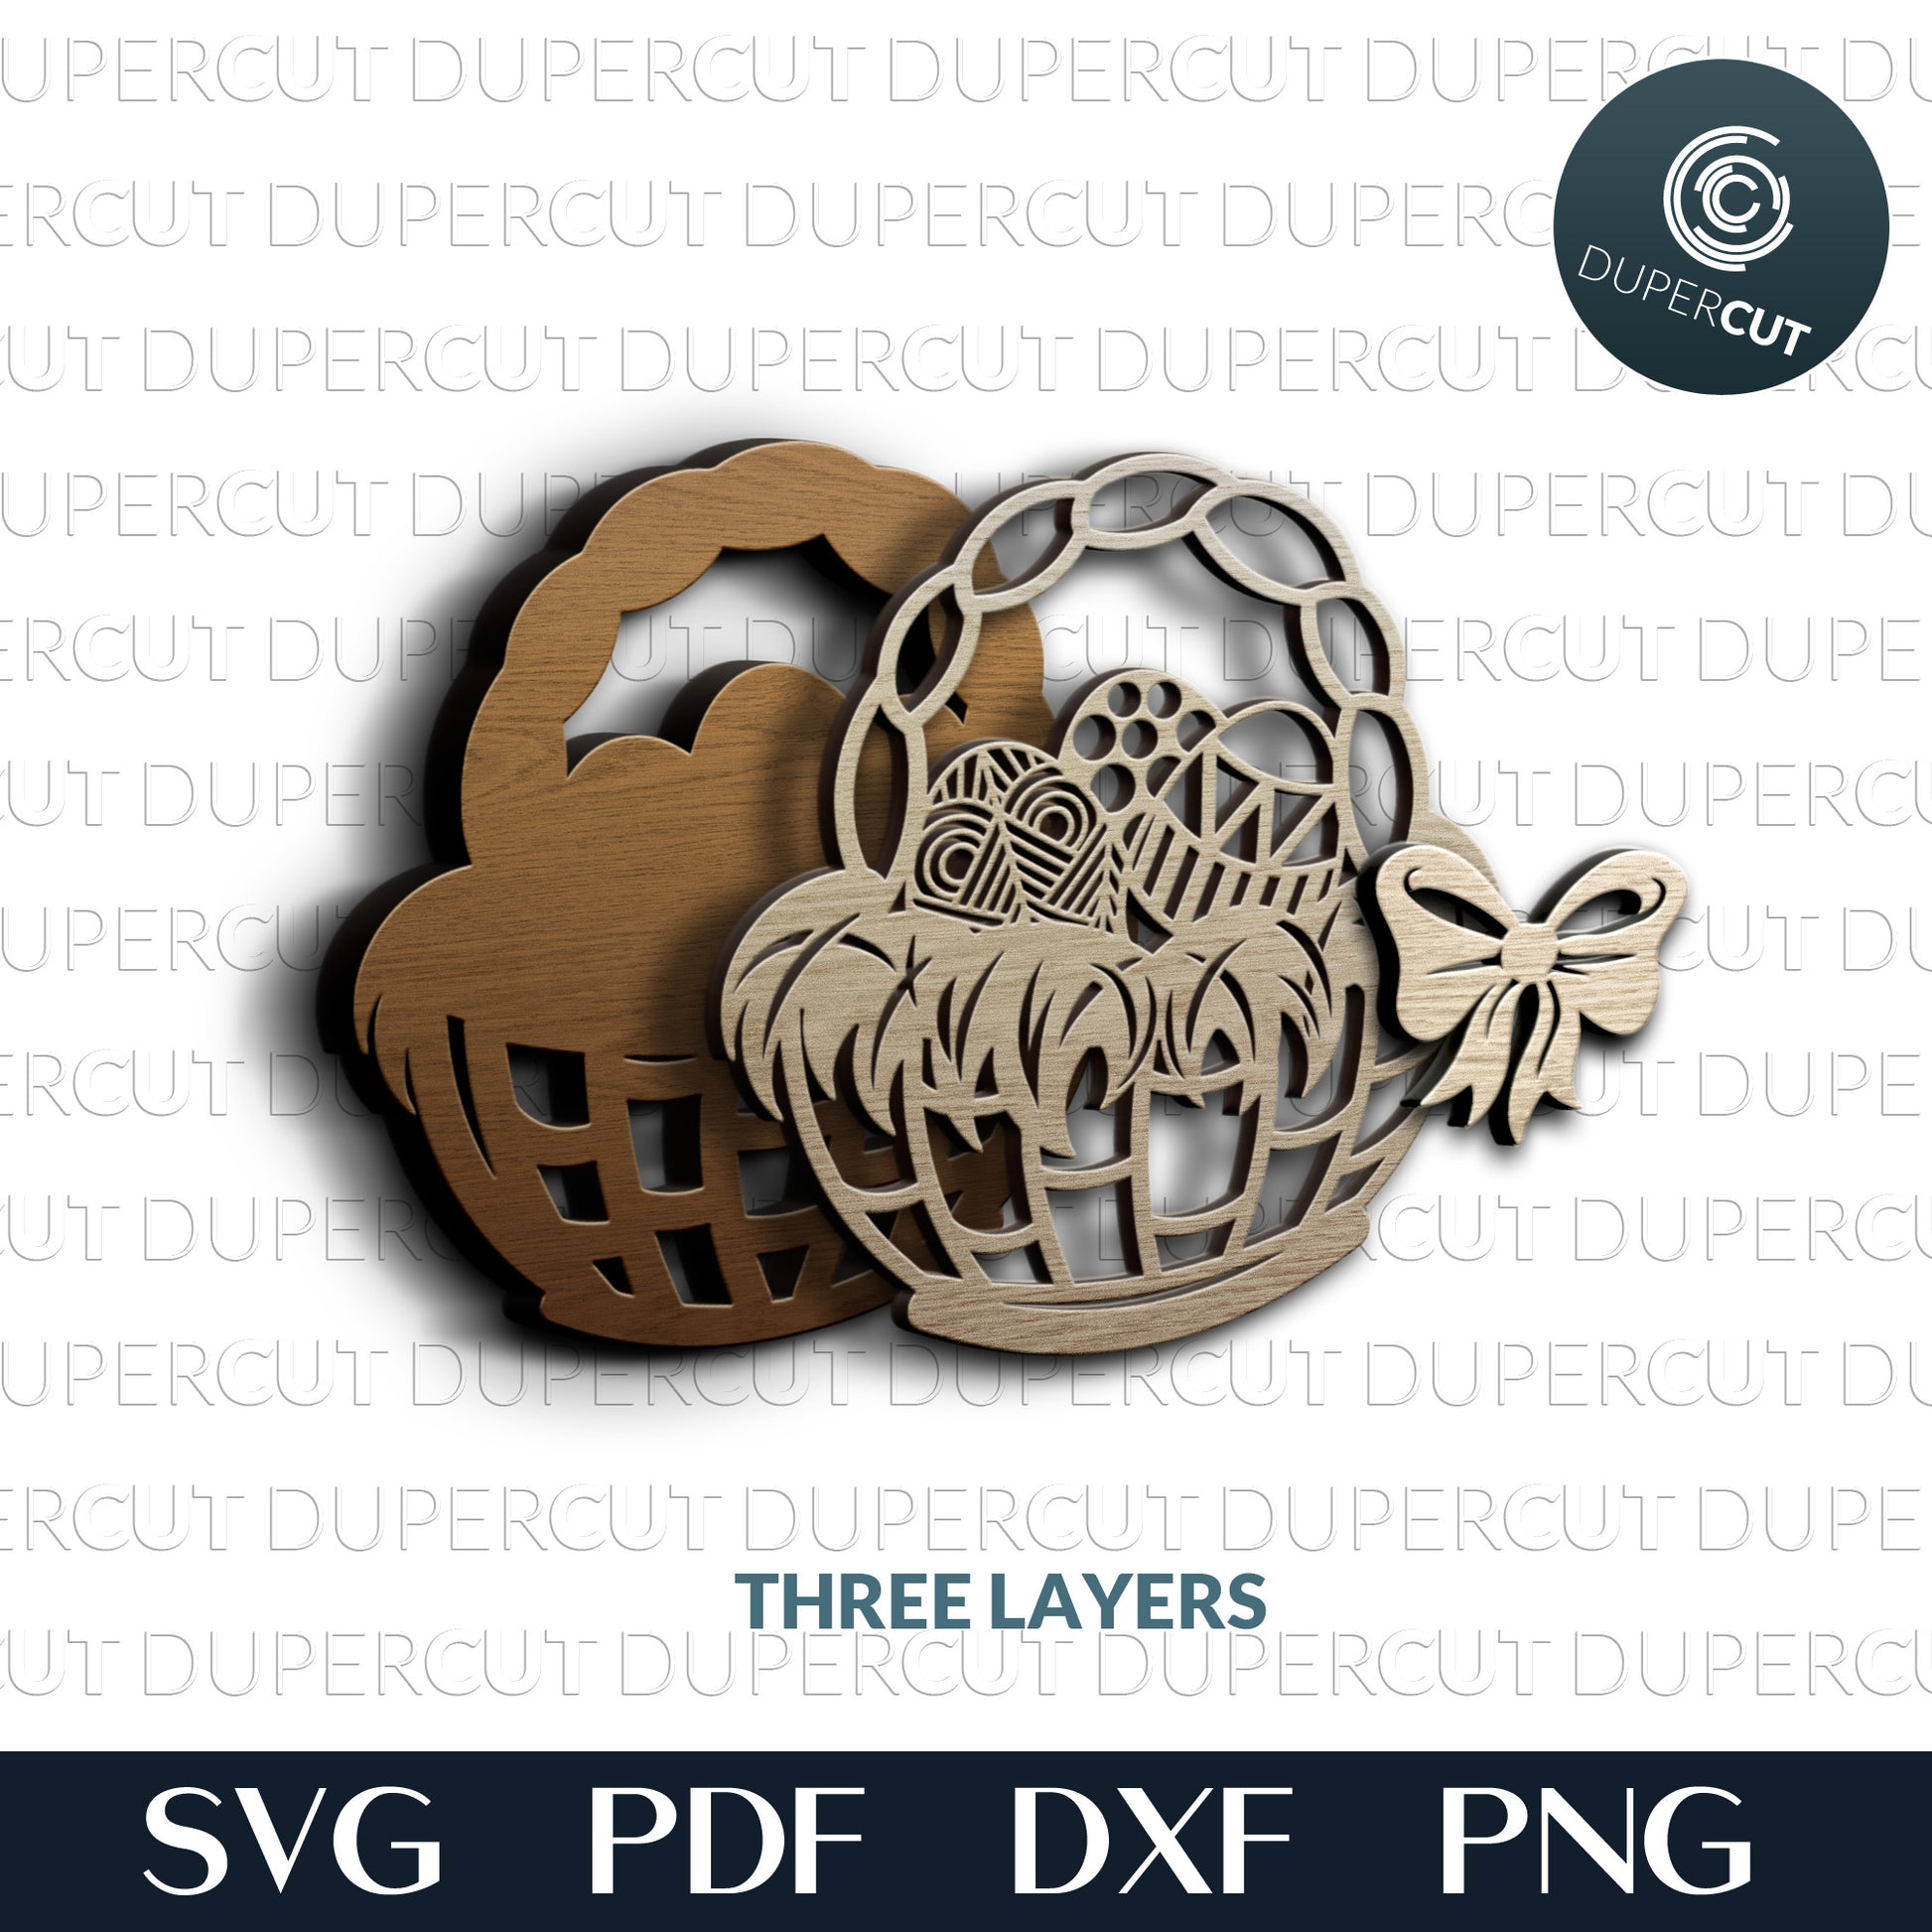 Basket with Easter eggs and bow - layered cutting template - SVG PDF DXF laser cut files for Glowforge, Cricut, Silhouette cameo, CNC Plasma machines